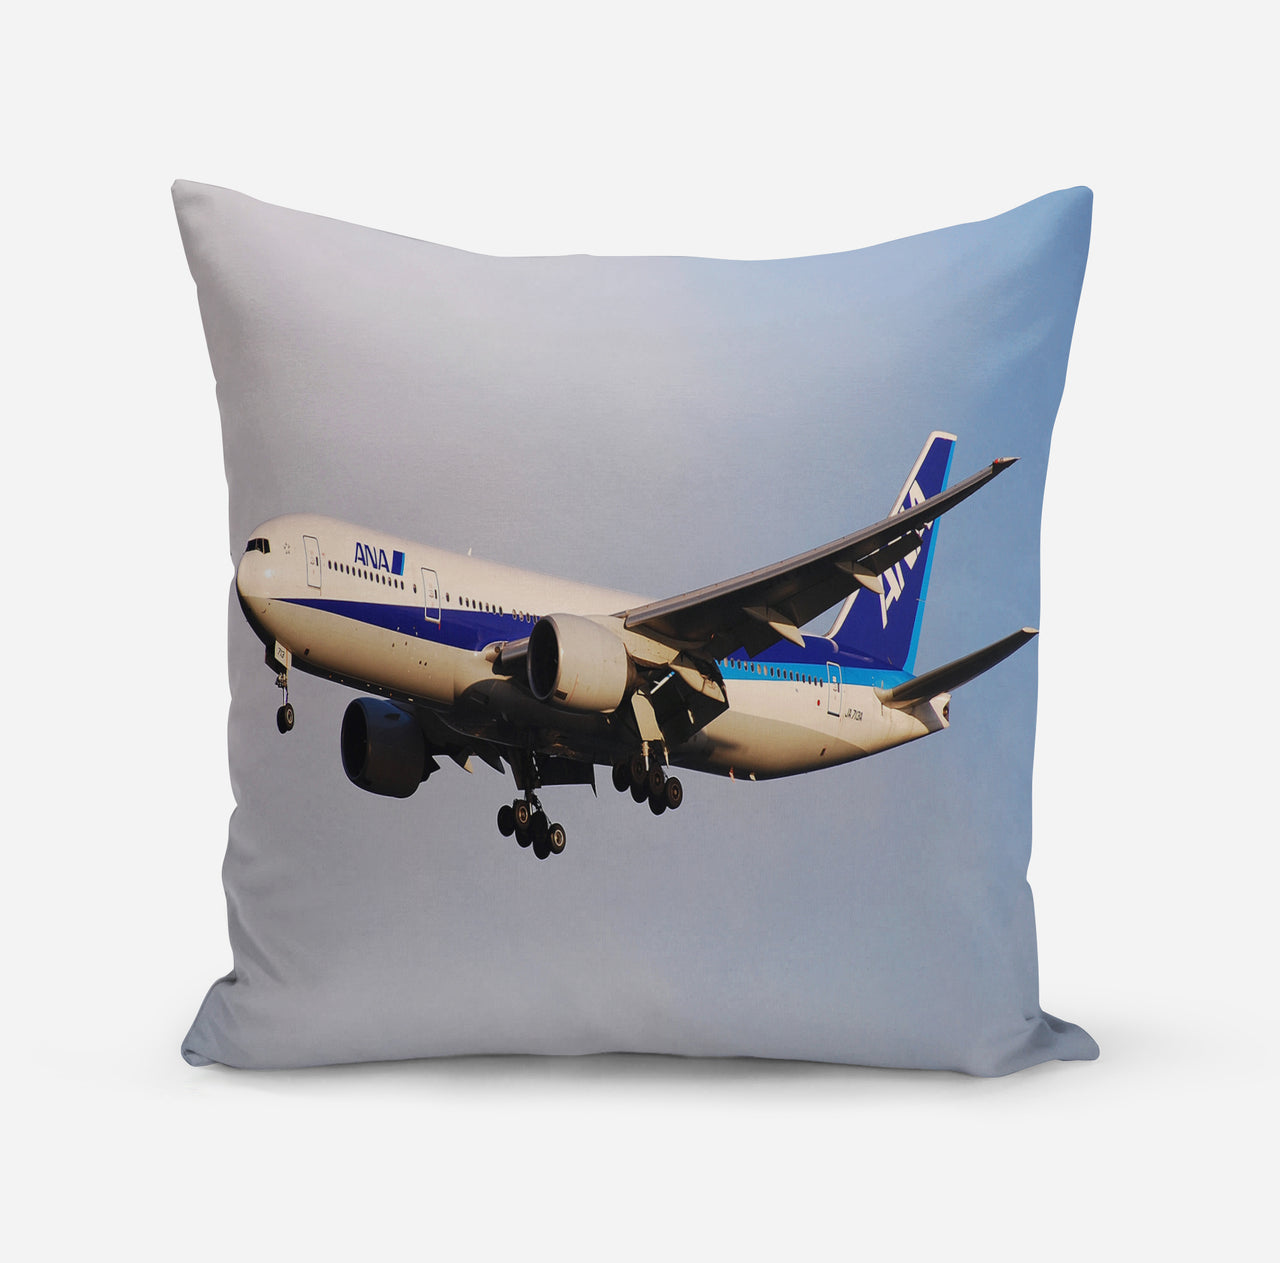 ANA's Boeing 777 Designed Pillows